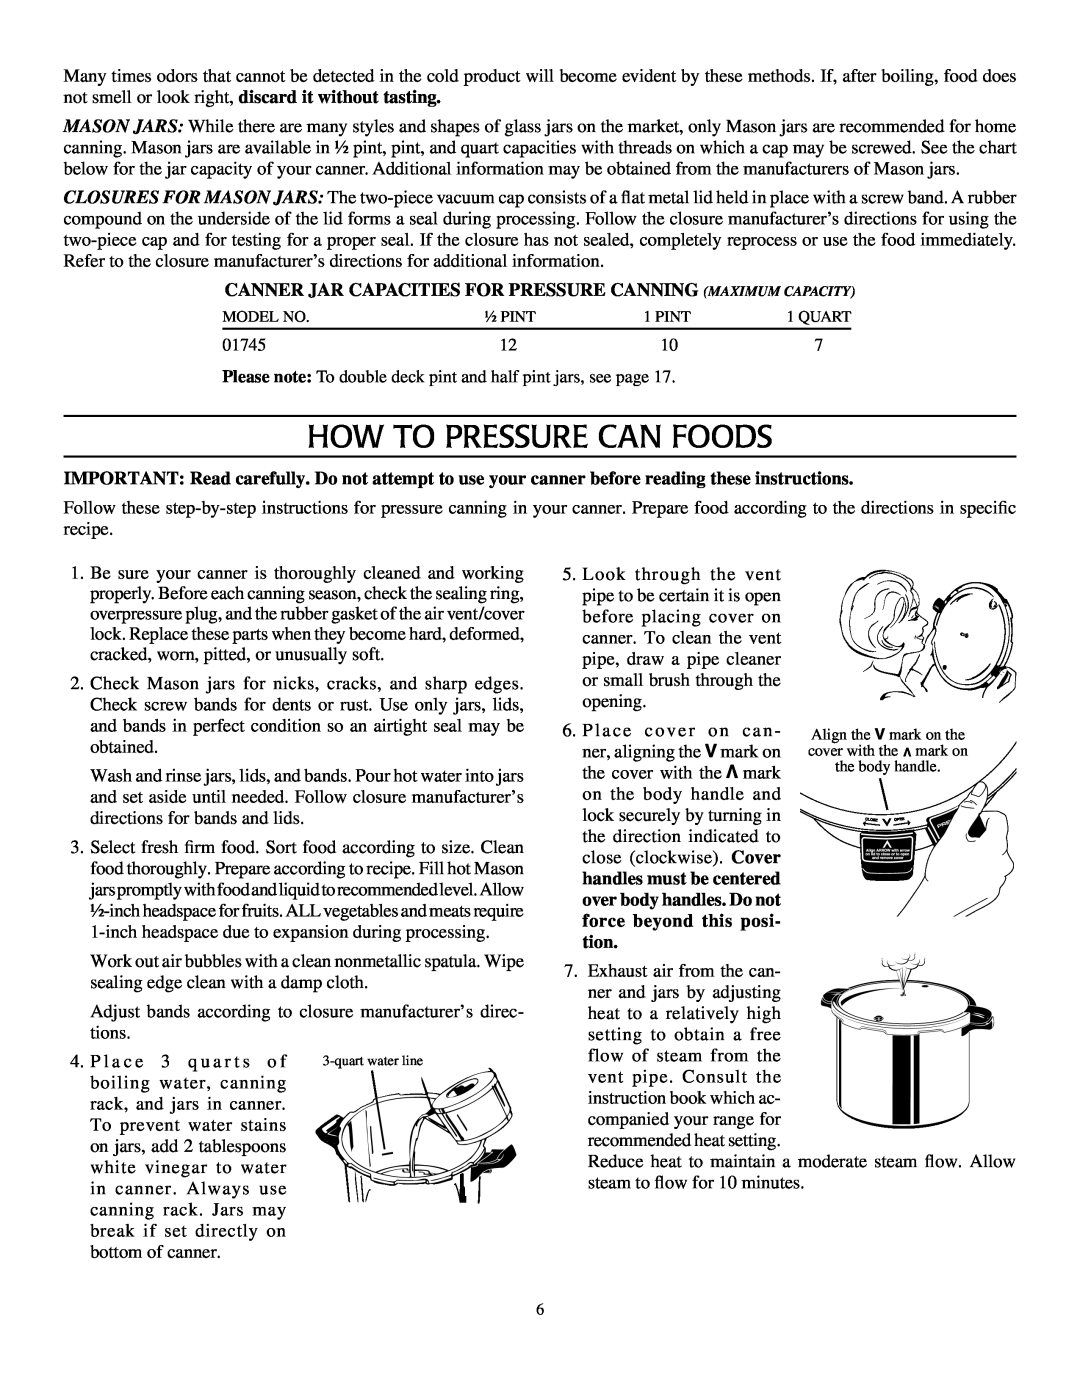 Presto Pressure Canner and Cooker How To Pressure Can Foods, Canner Jar Capacities For Pressure Canning Maximum Capacity 